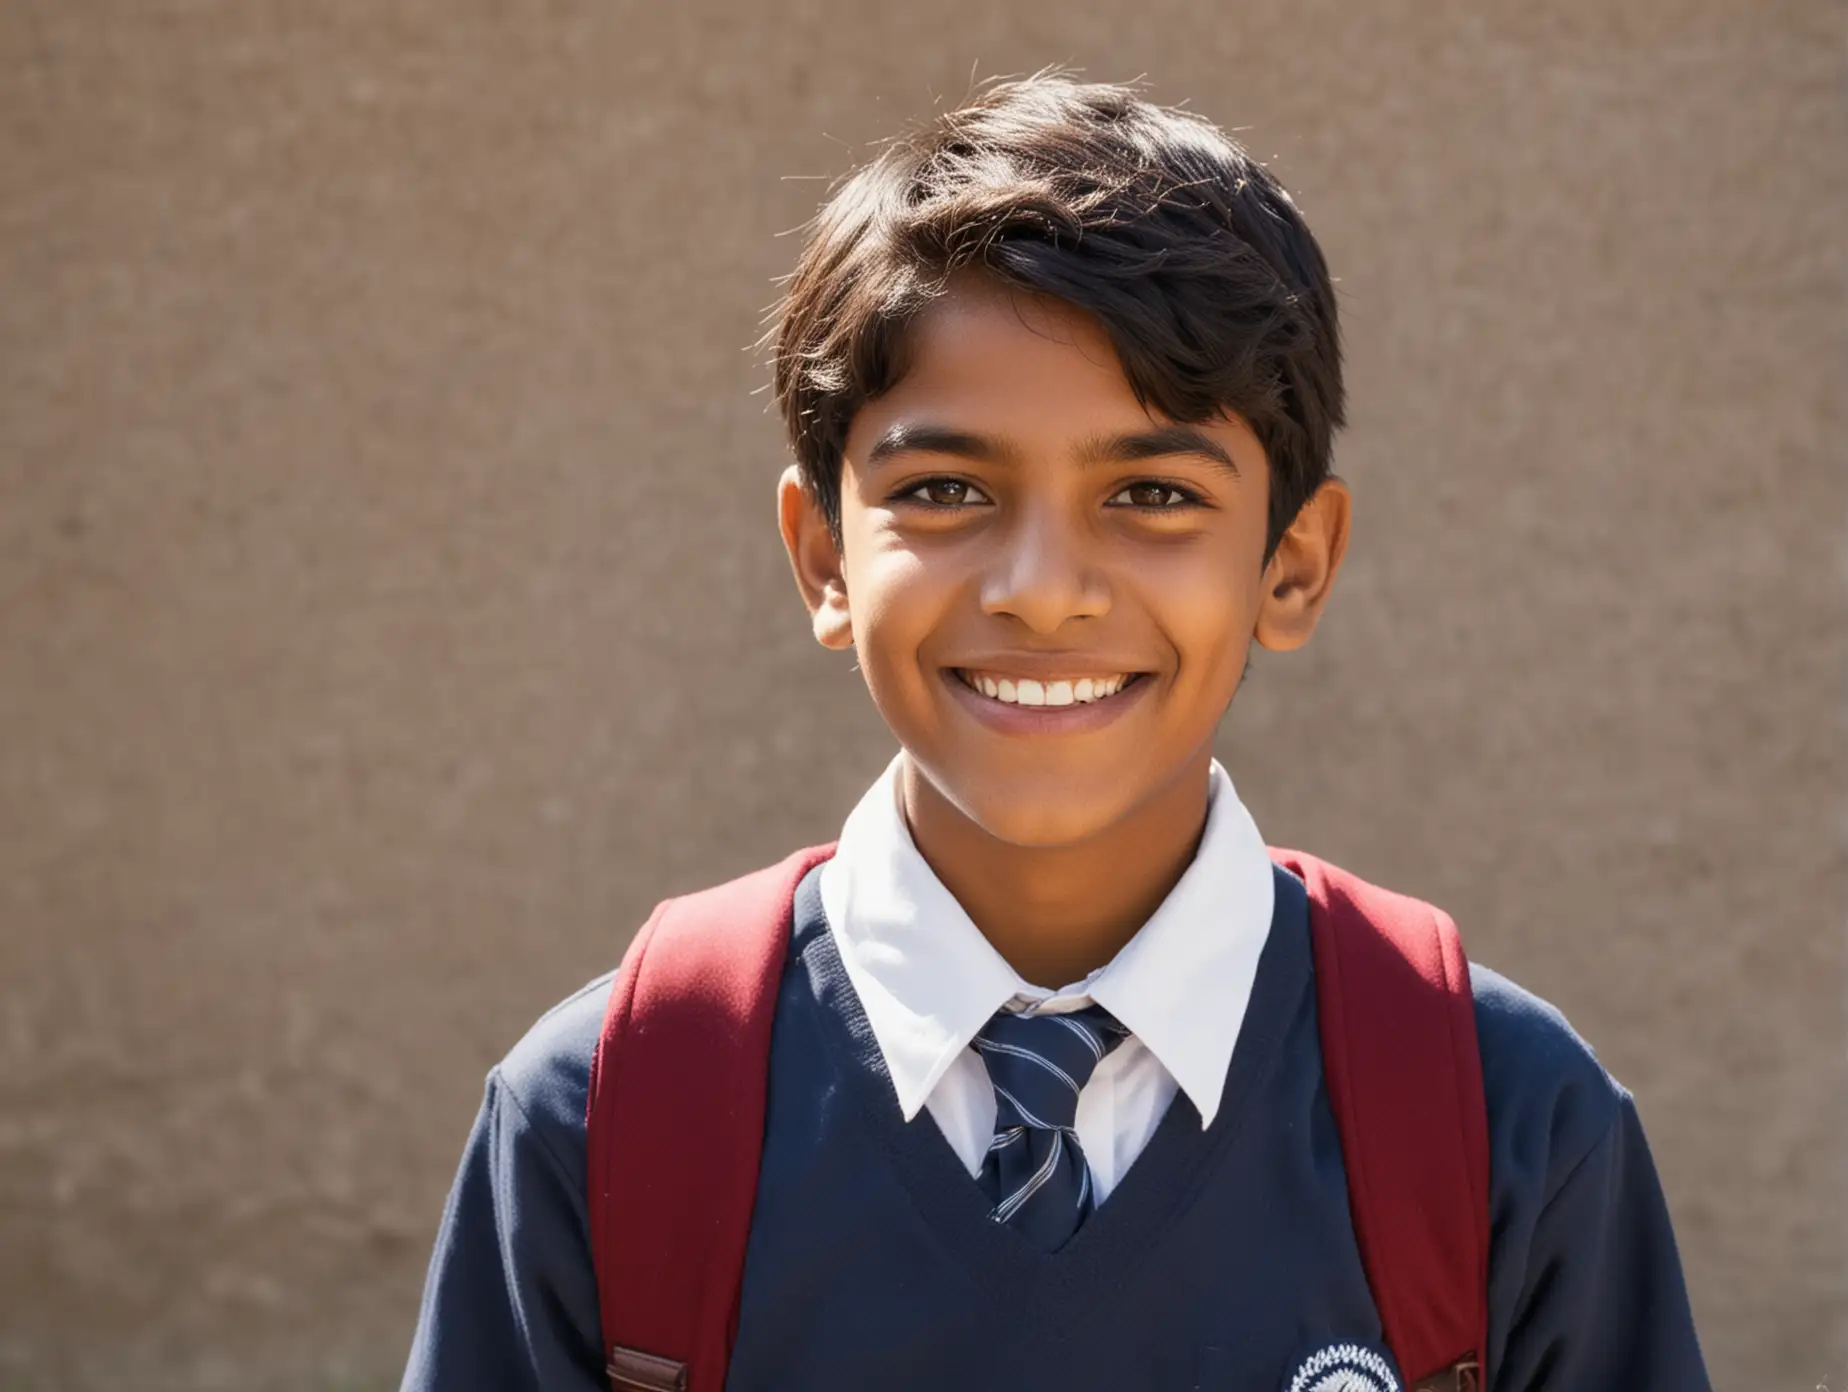 Confident-Indian-Boy-in-6th-Grade-School-Uniform-Smiling-Outdoors